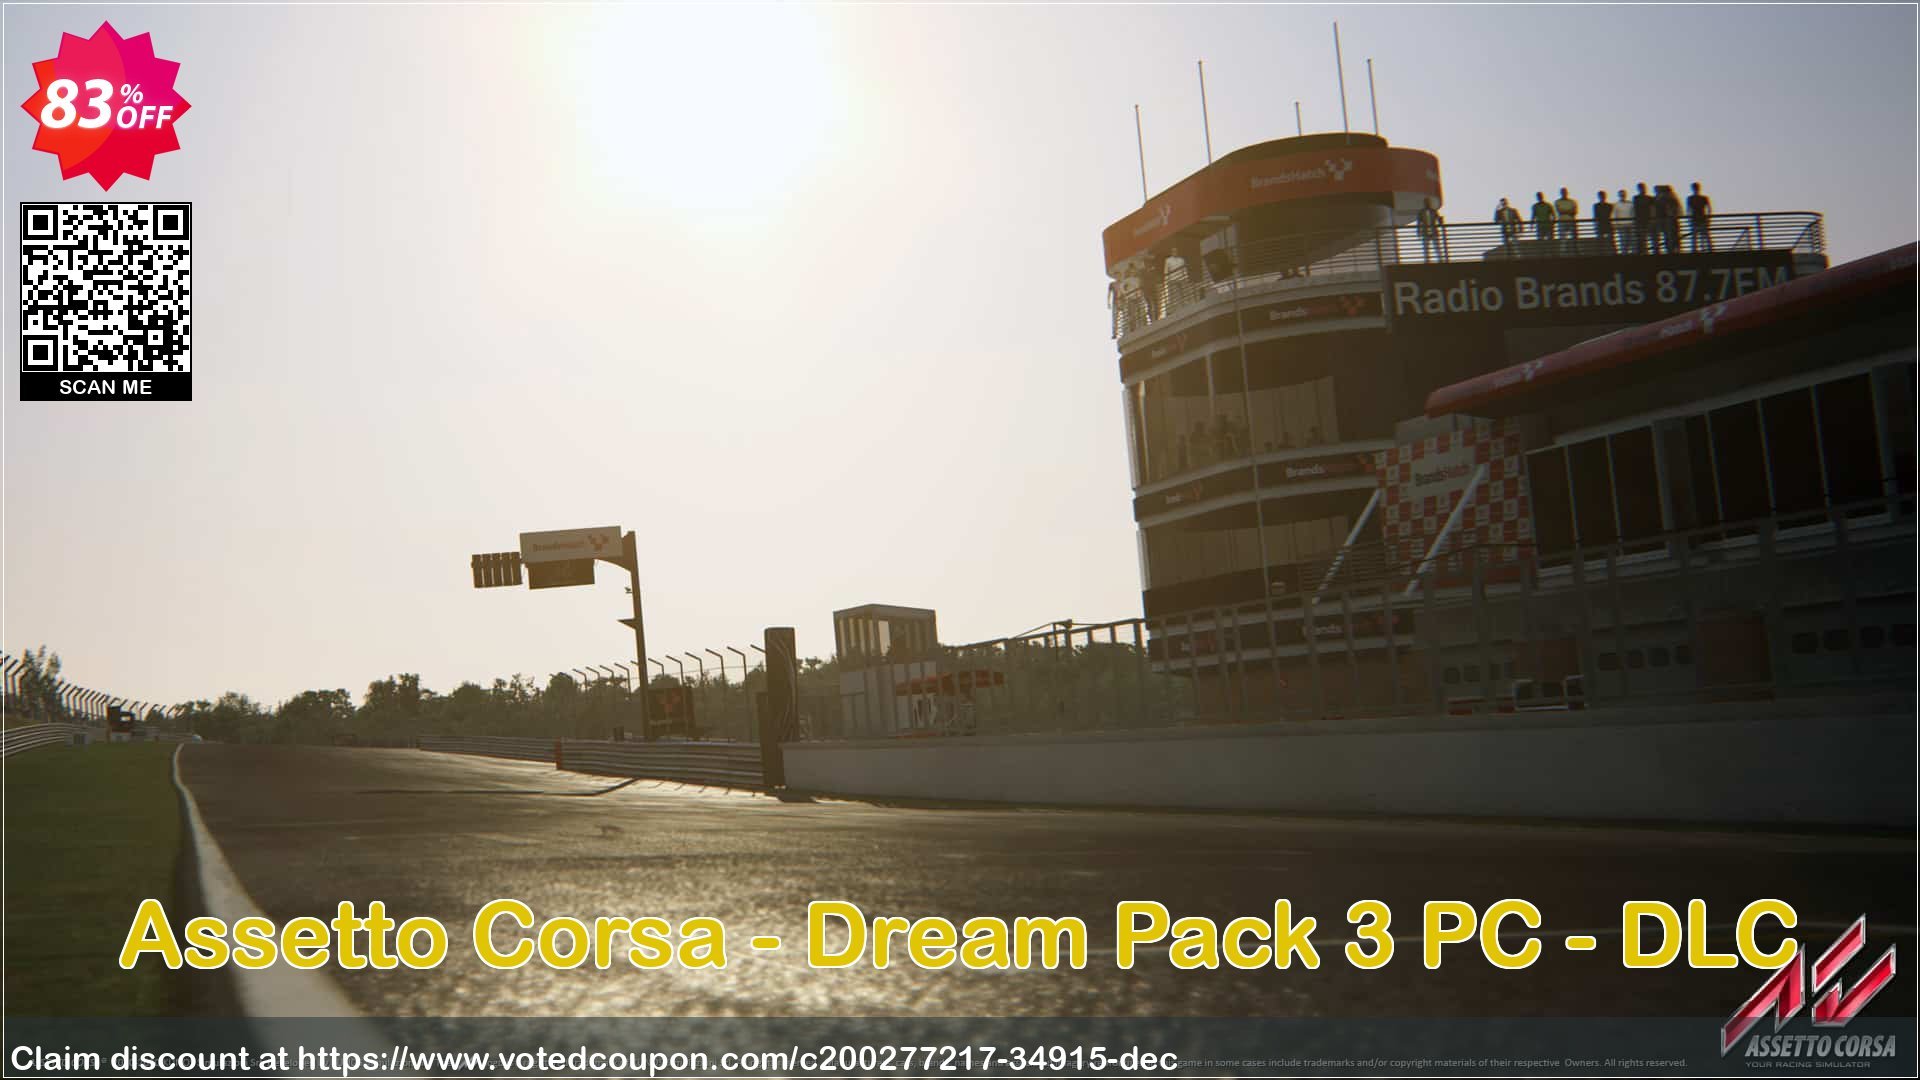 Assetto Corsa - Dream Pack 3 PC - DLC Coupon Code May 2024, 83% OFF - VotedCoupon